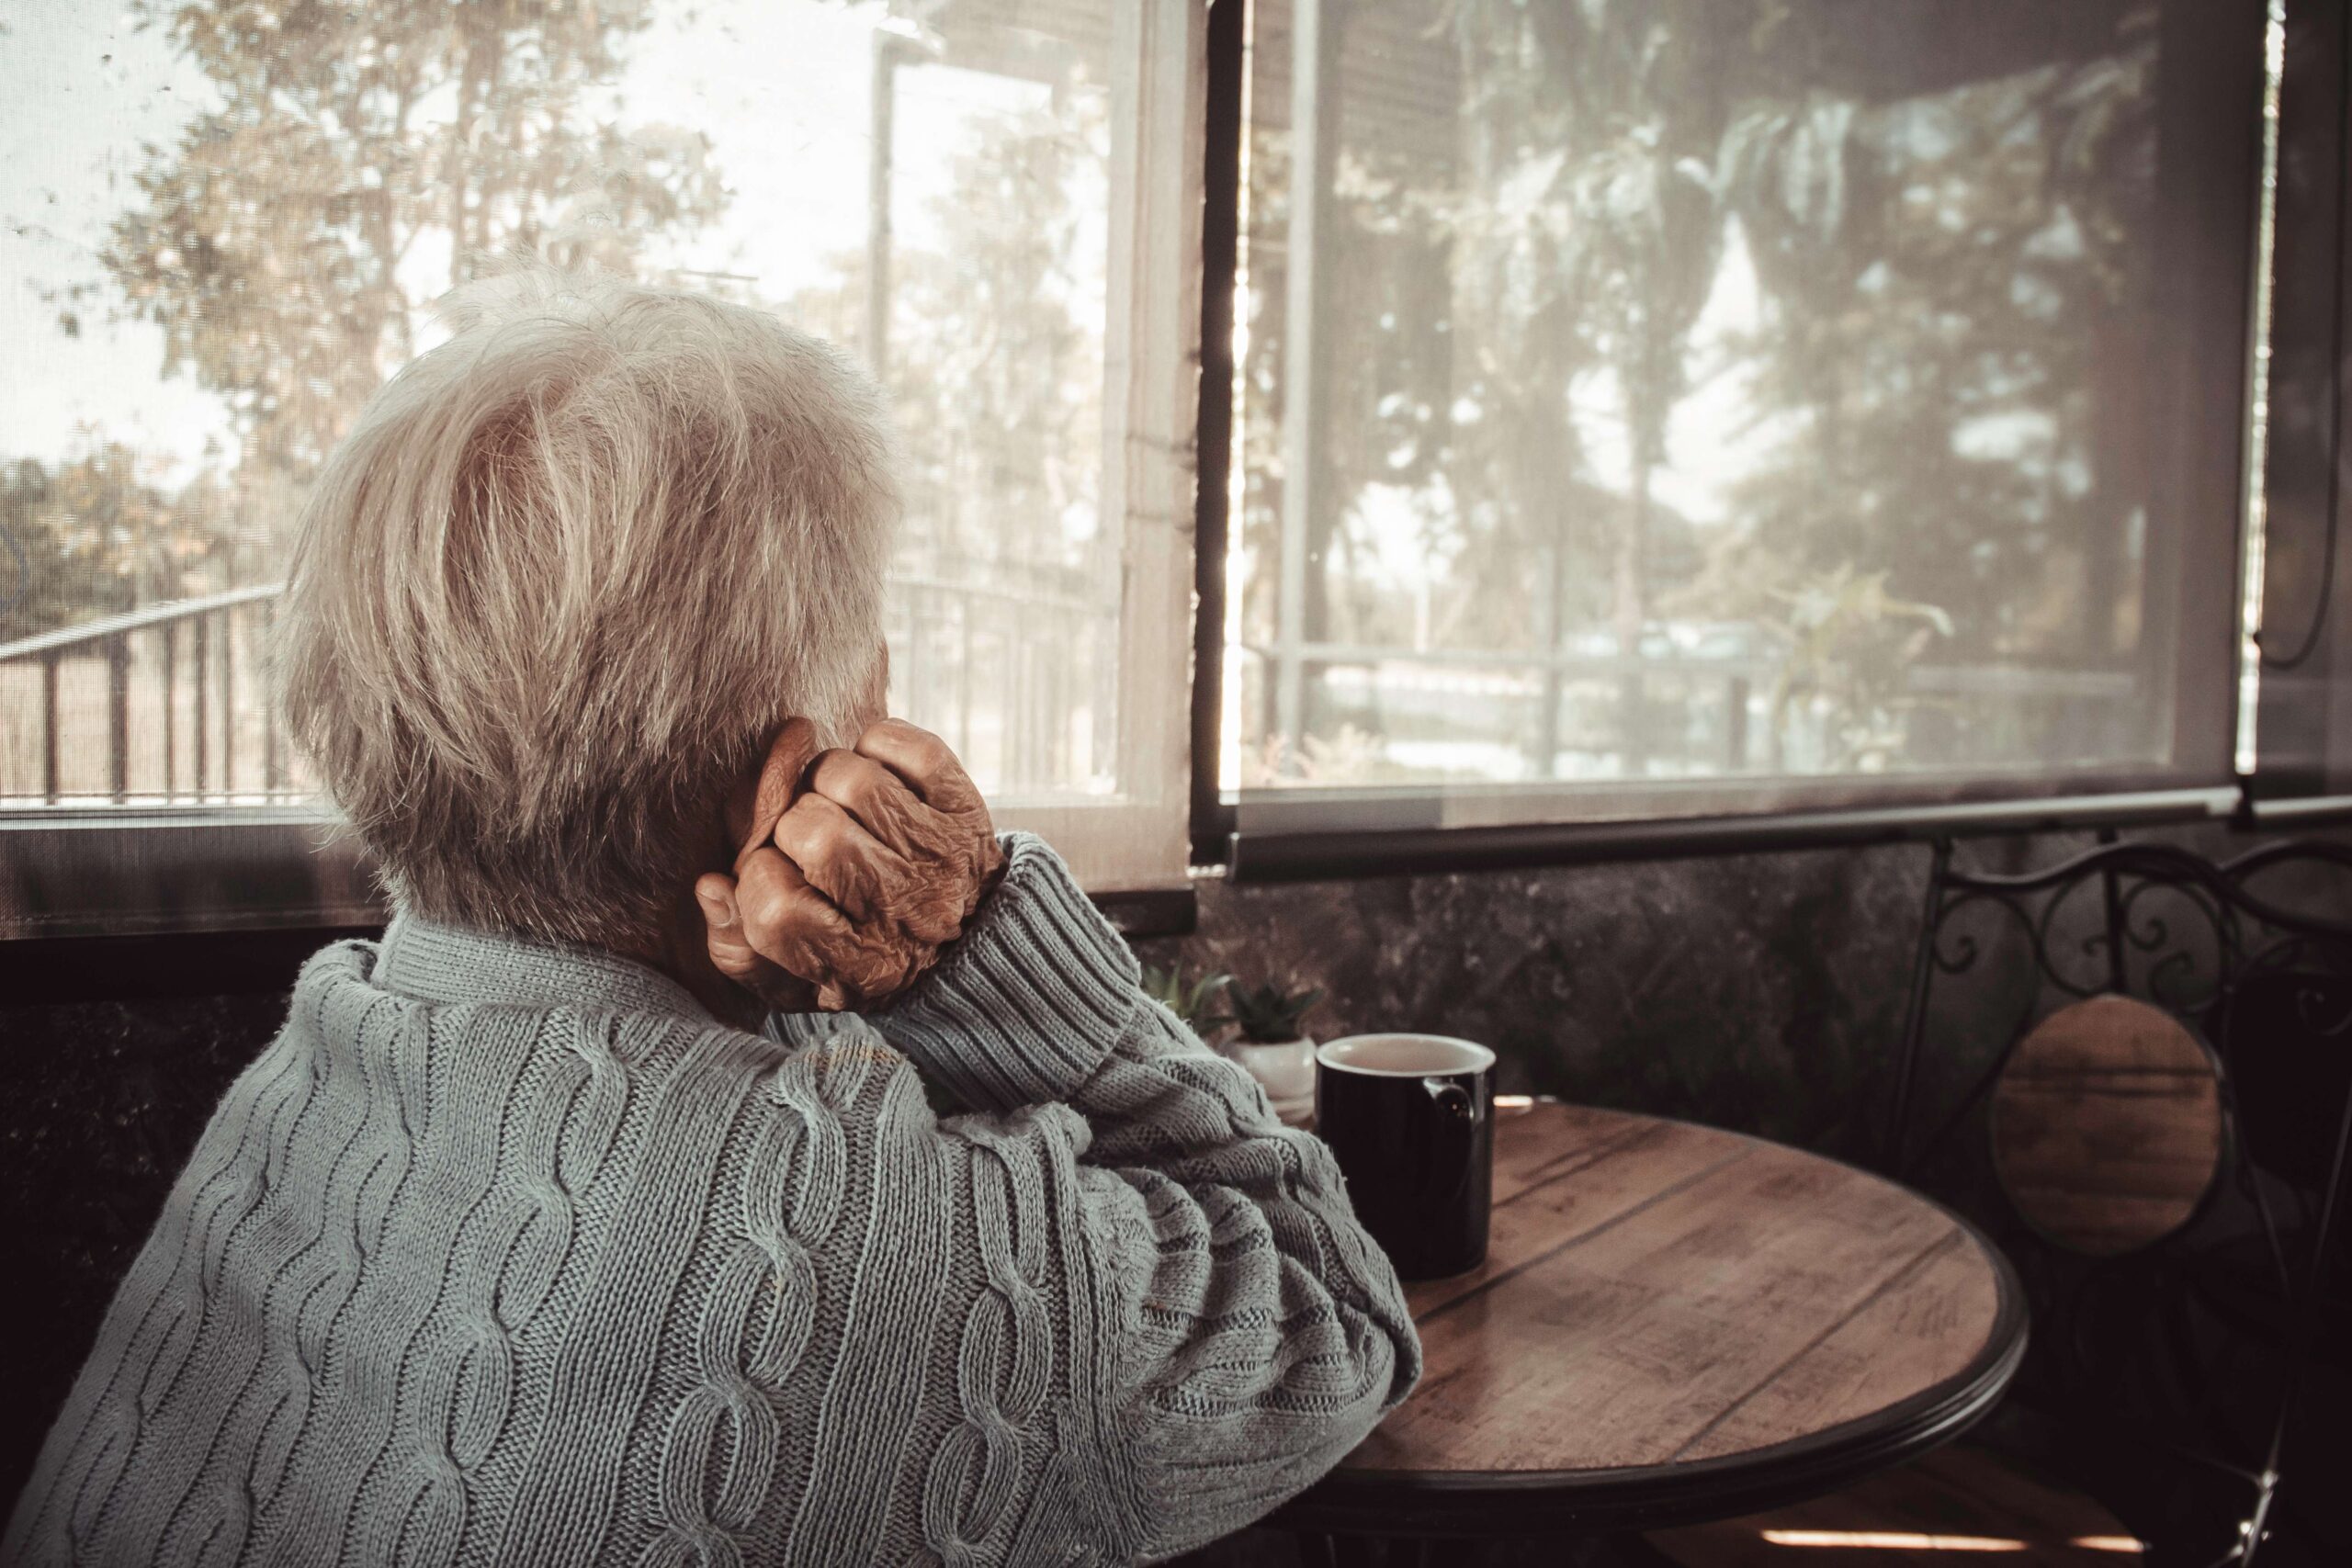 What is considered neglect in a nursing home?